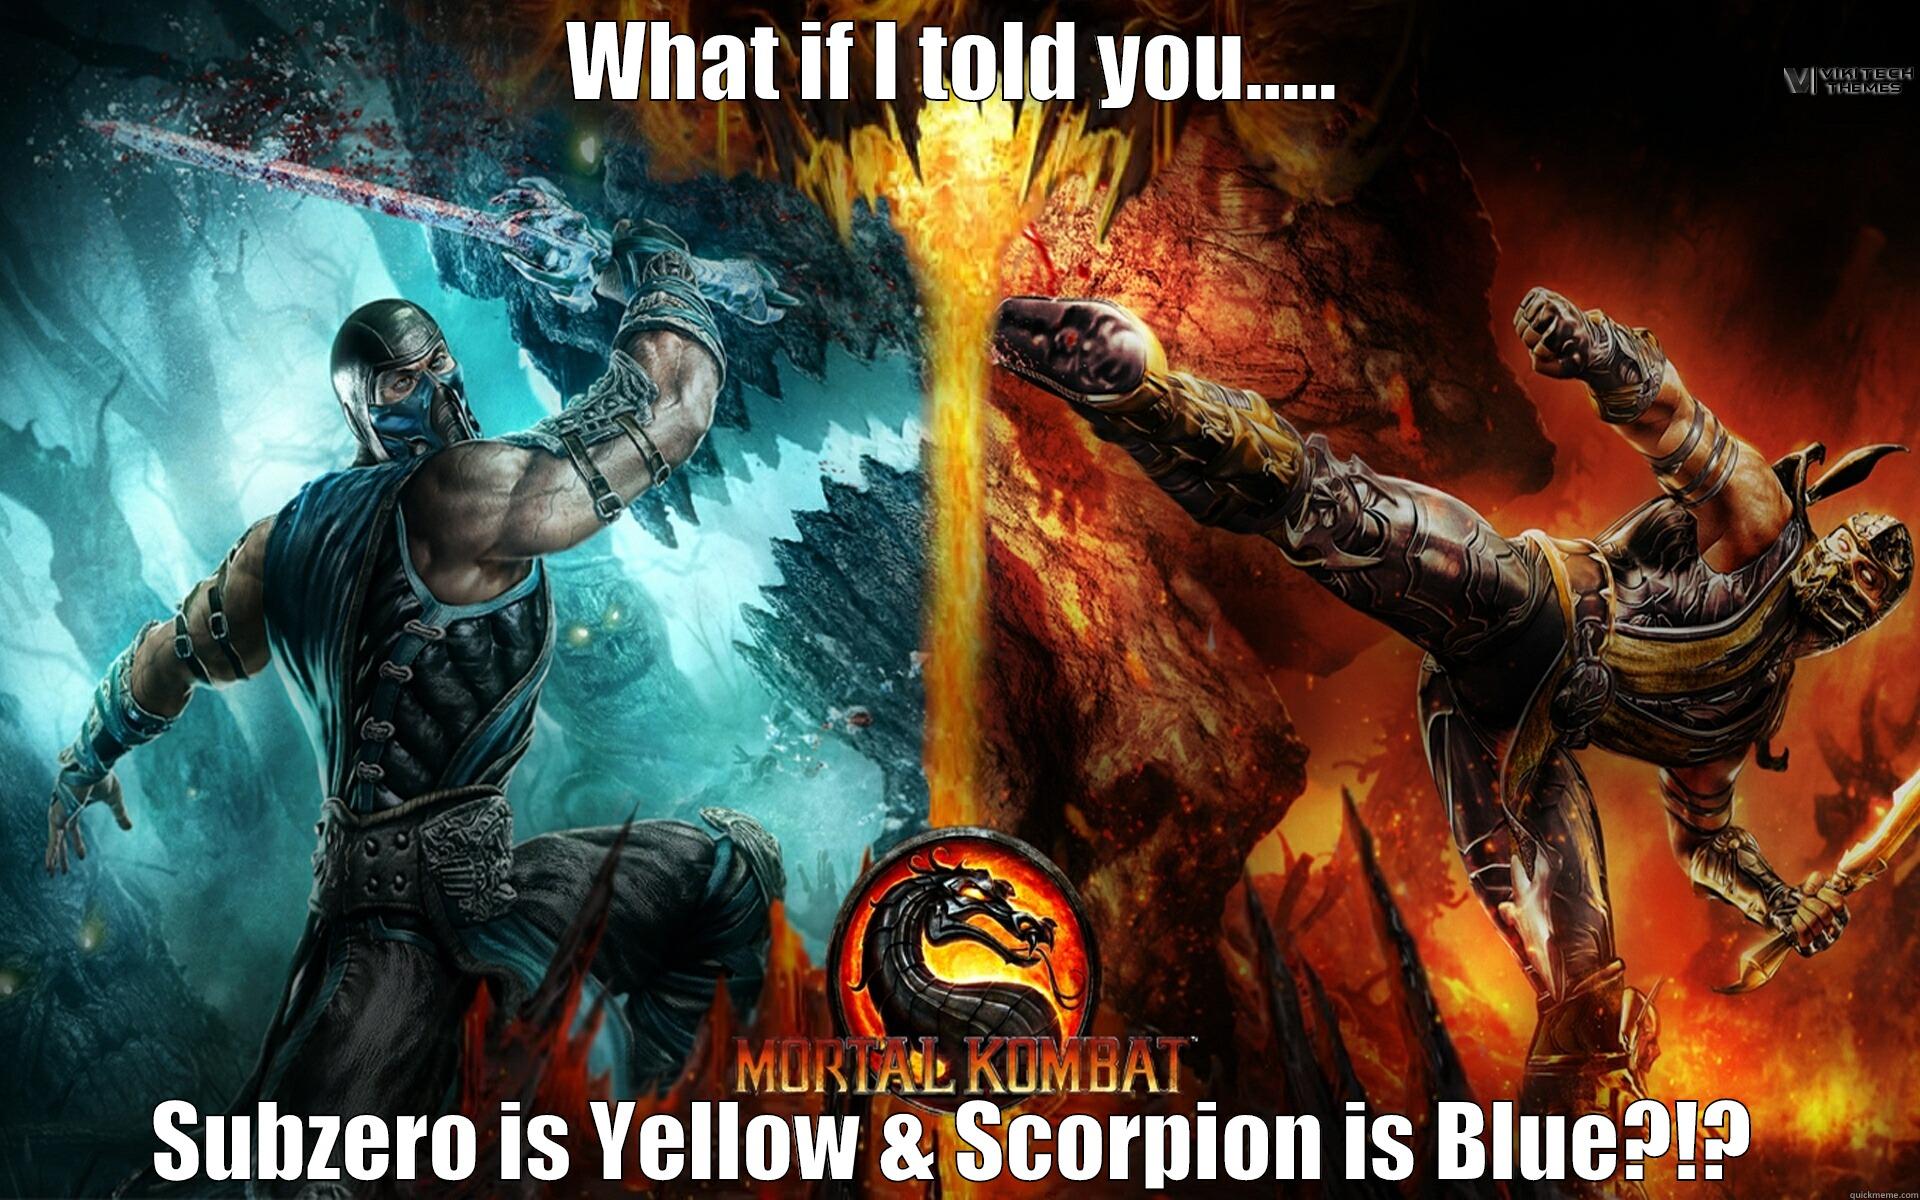 Black & Blue or Yellow & Gold - WHAT IF I TOLD YOU..... SUBZERO IS YELLOW & SCORPION IS BLUE?!? Misc